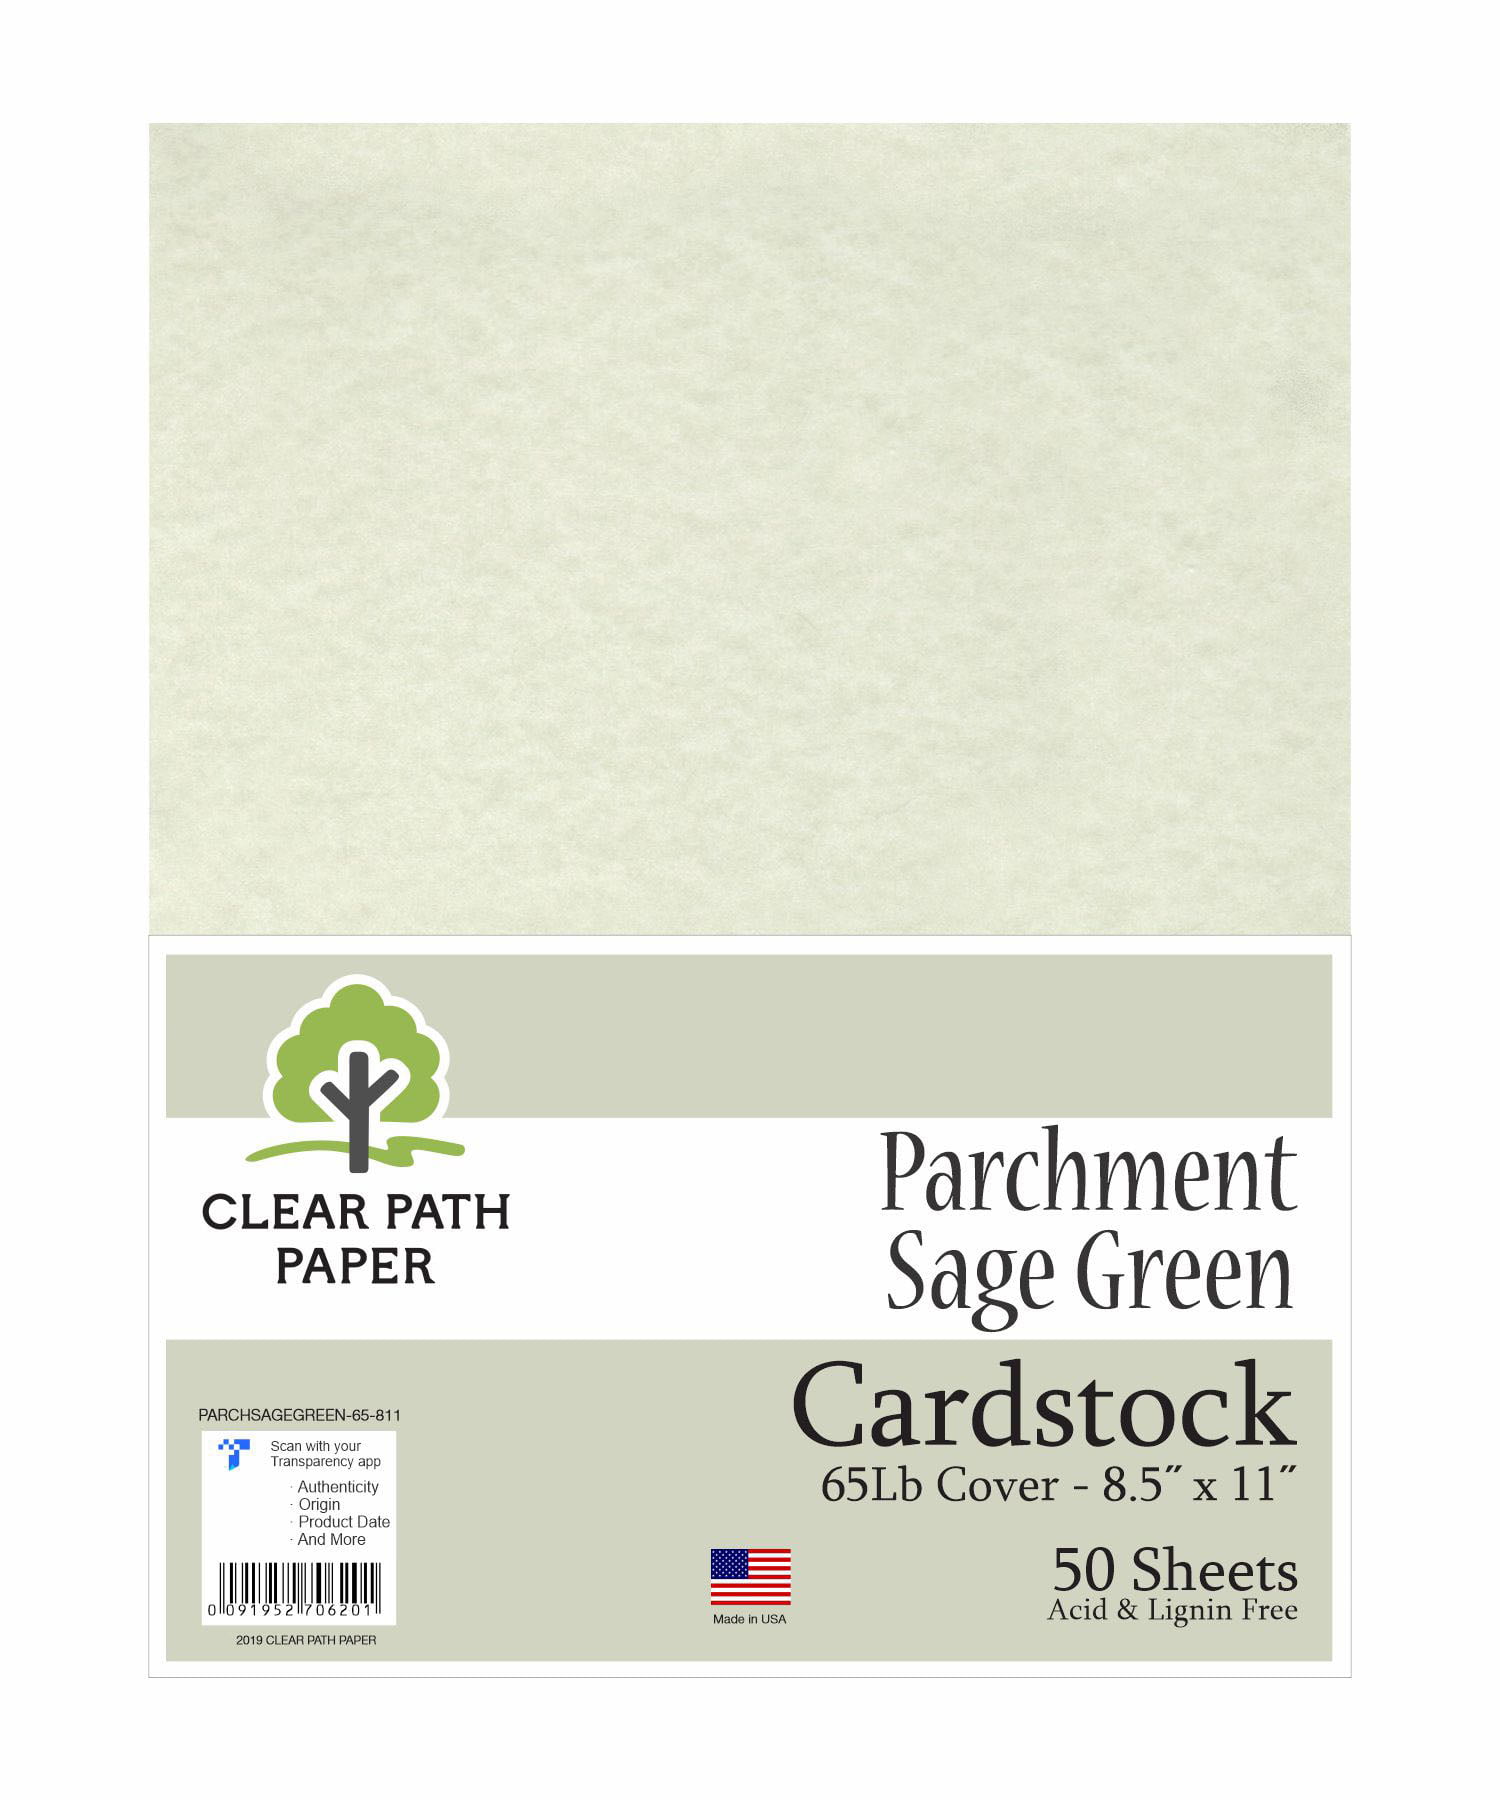 Black Cardstock - 8.5 x 11 inch - 65Lb Cover - 50 Sheets - Clear Path Paper